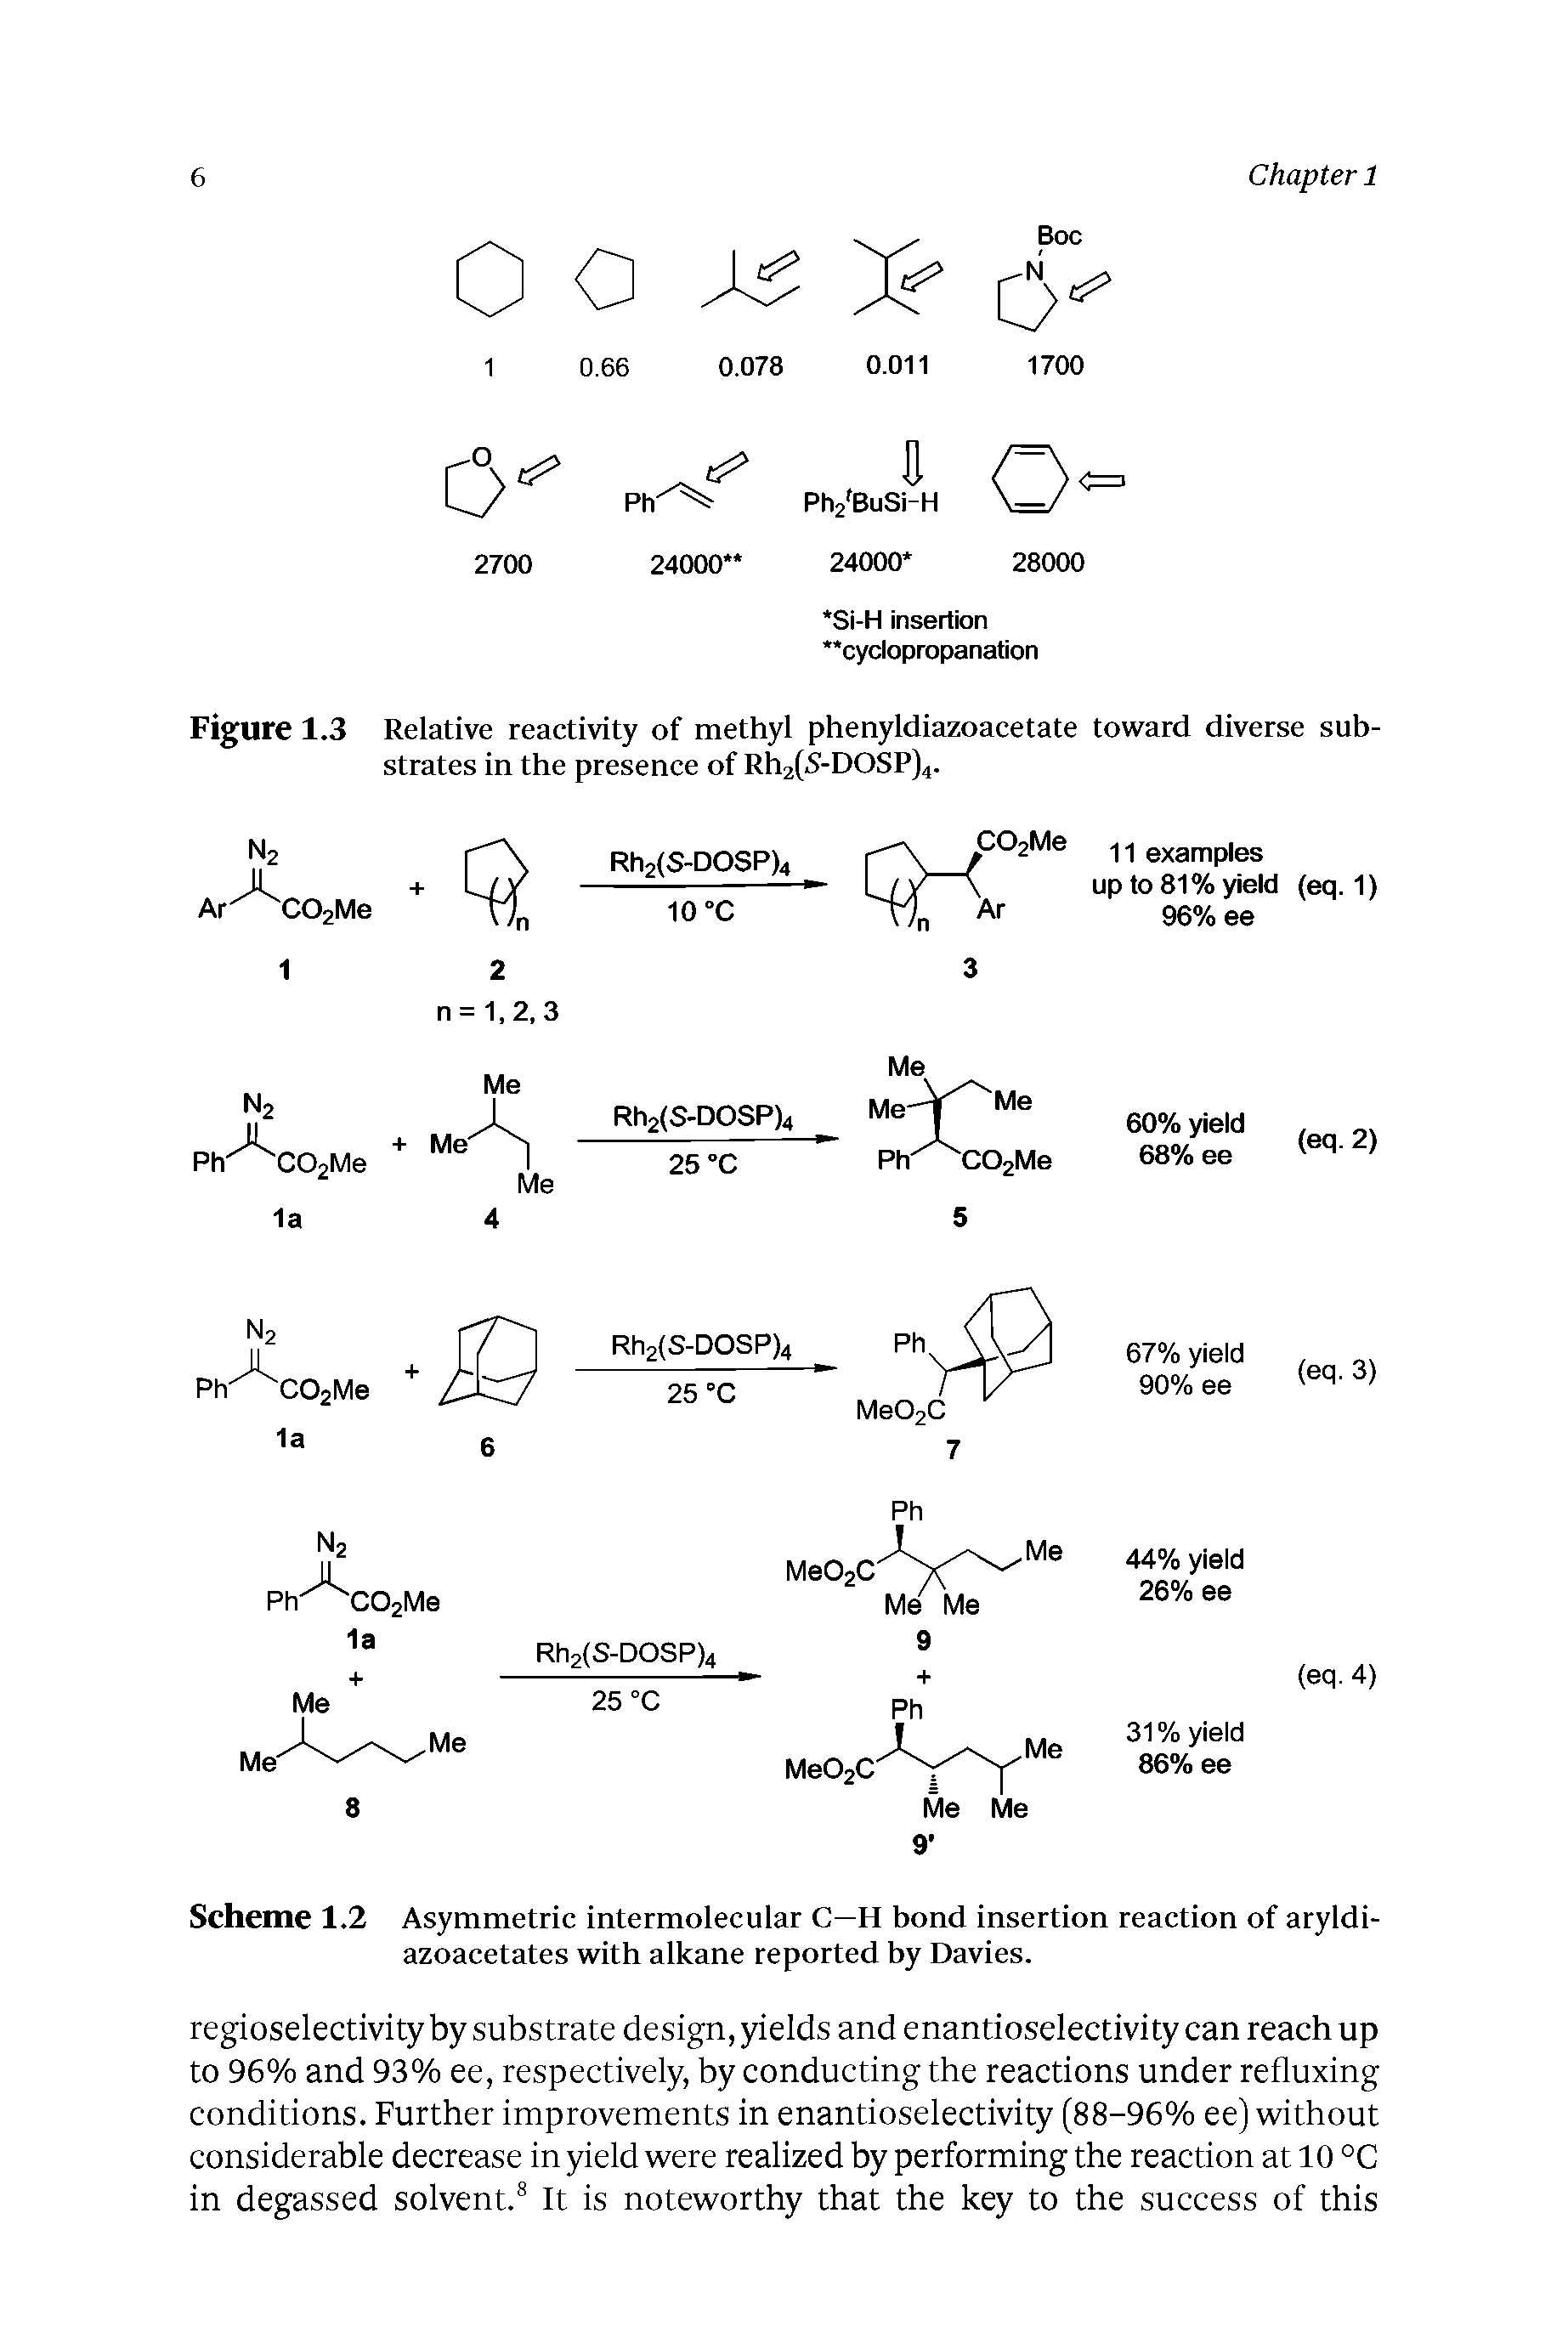 Figure 1.3 Relative reactivity of methyl phenyldiazoacetate toward diverse substrates in the presence of Rli2(S-DOSP)4.